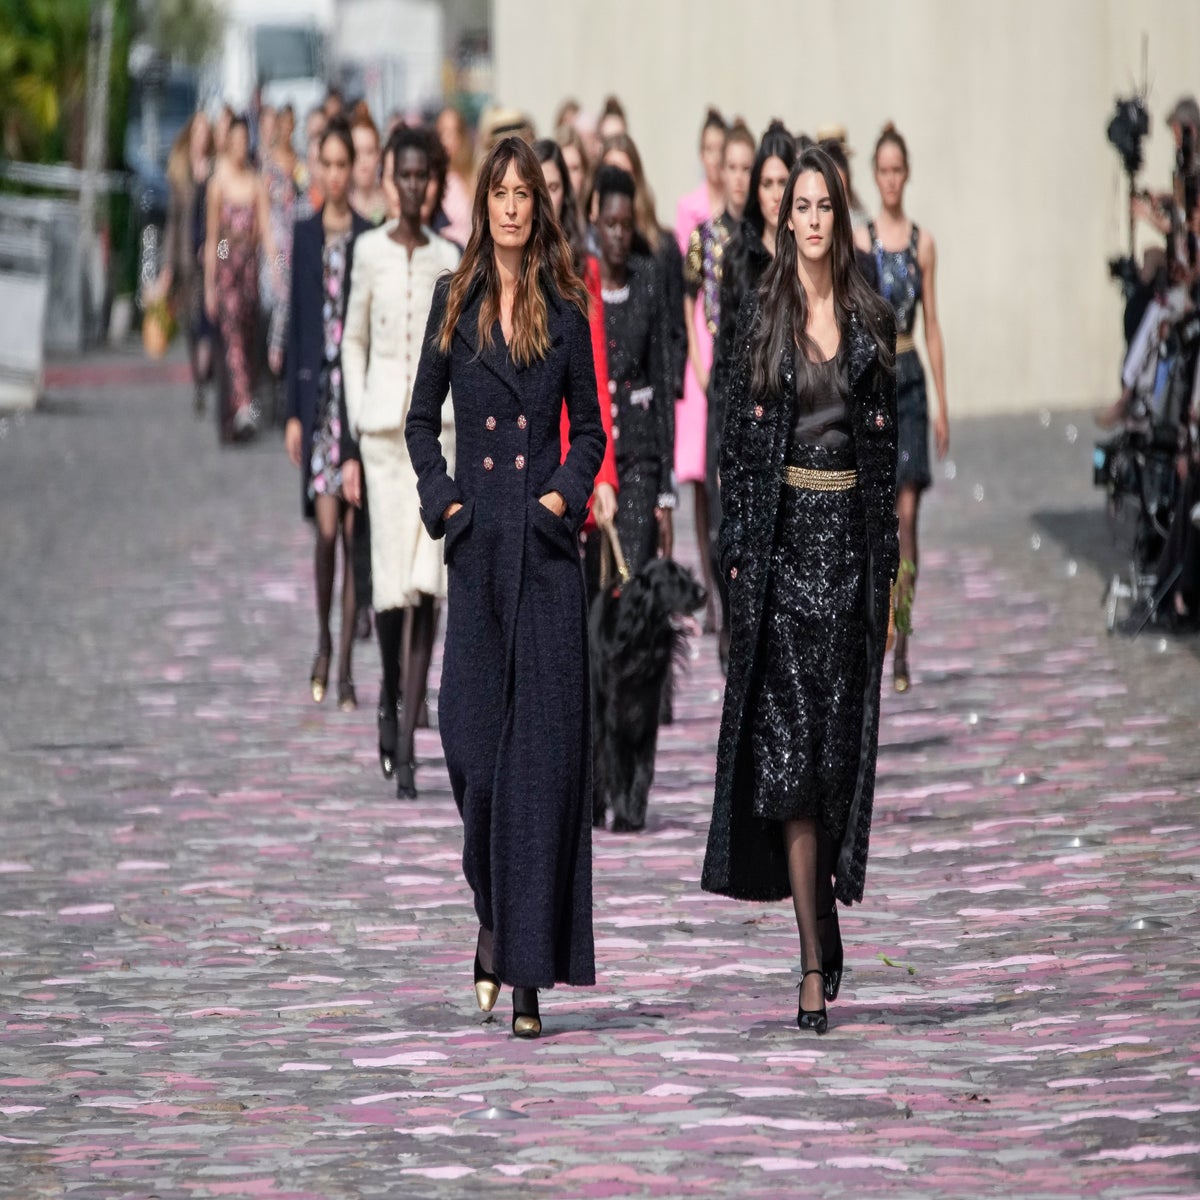 Chanel haute couture makes a subdued ode to Parisian elegance in  fall-winter collection